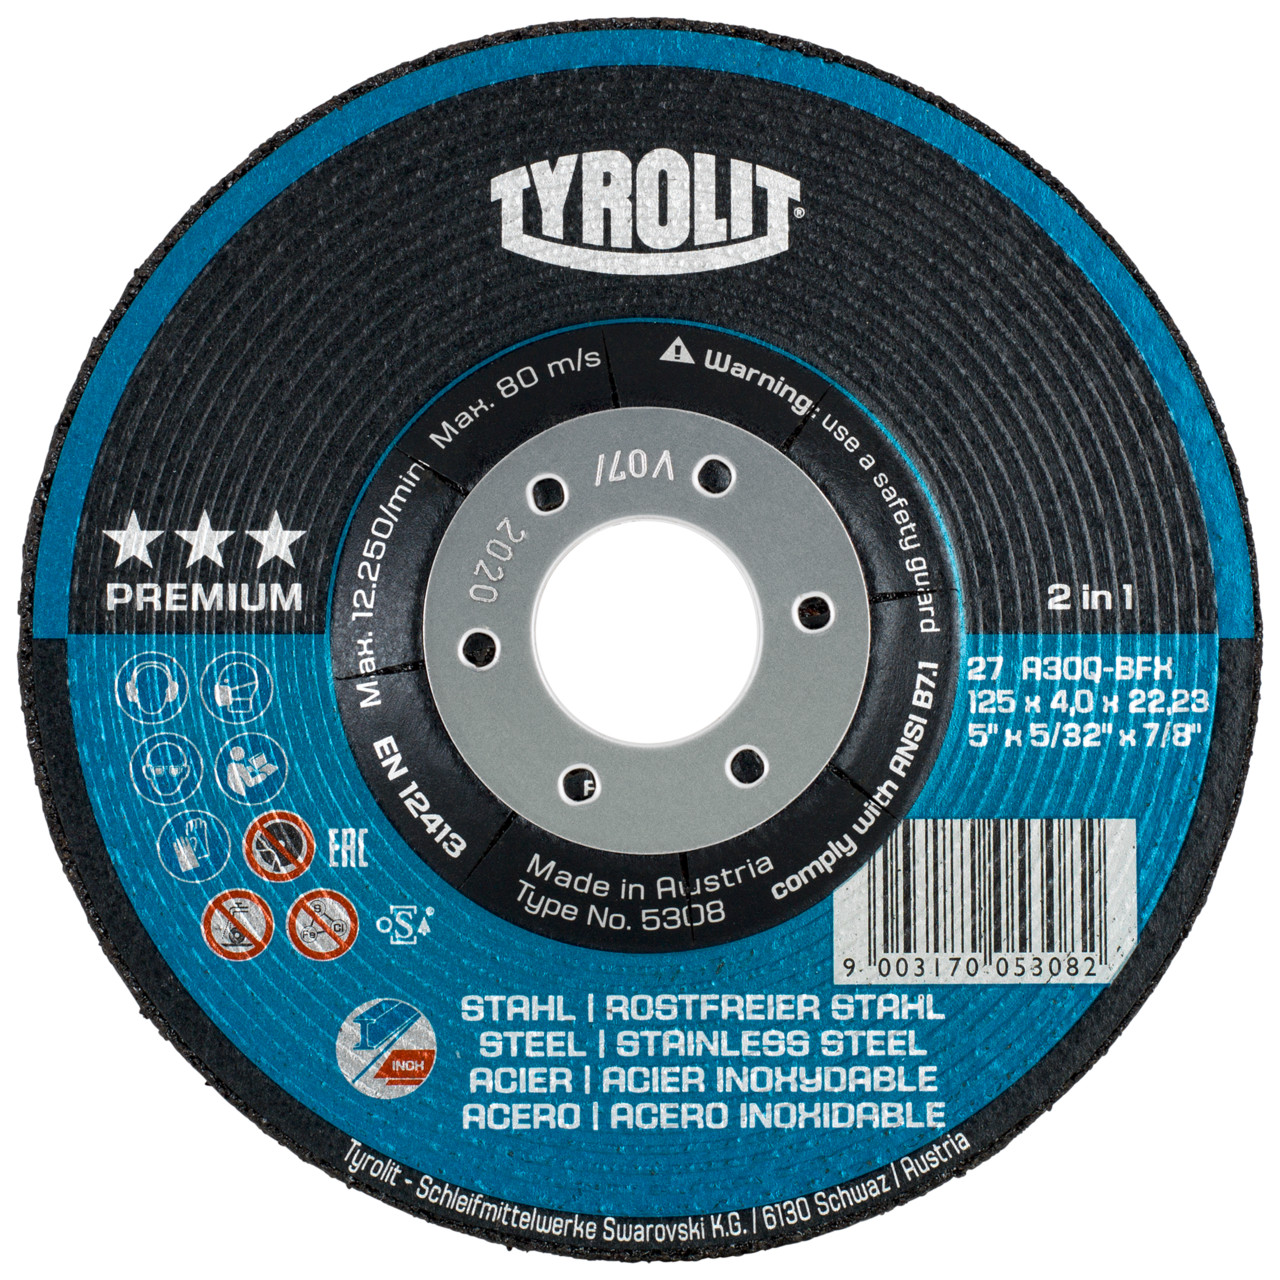 Tyrolit Roughing disc DxUxH 150x4x22.23 2in1 for steel and stainless steel, shape: 27 - offset version, Art. 734378